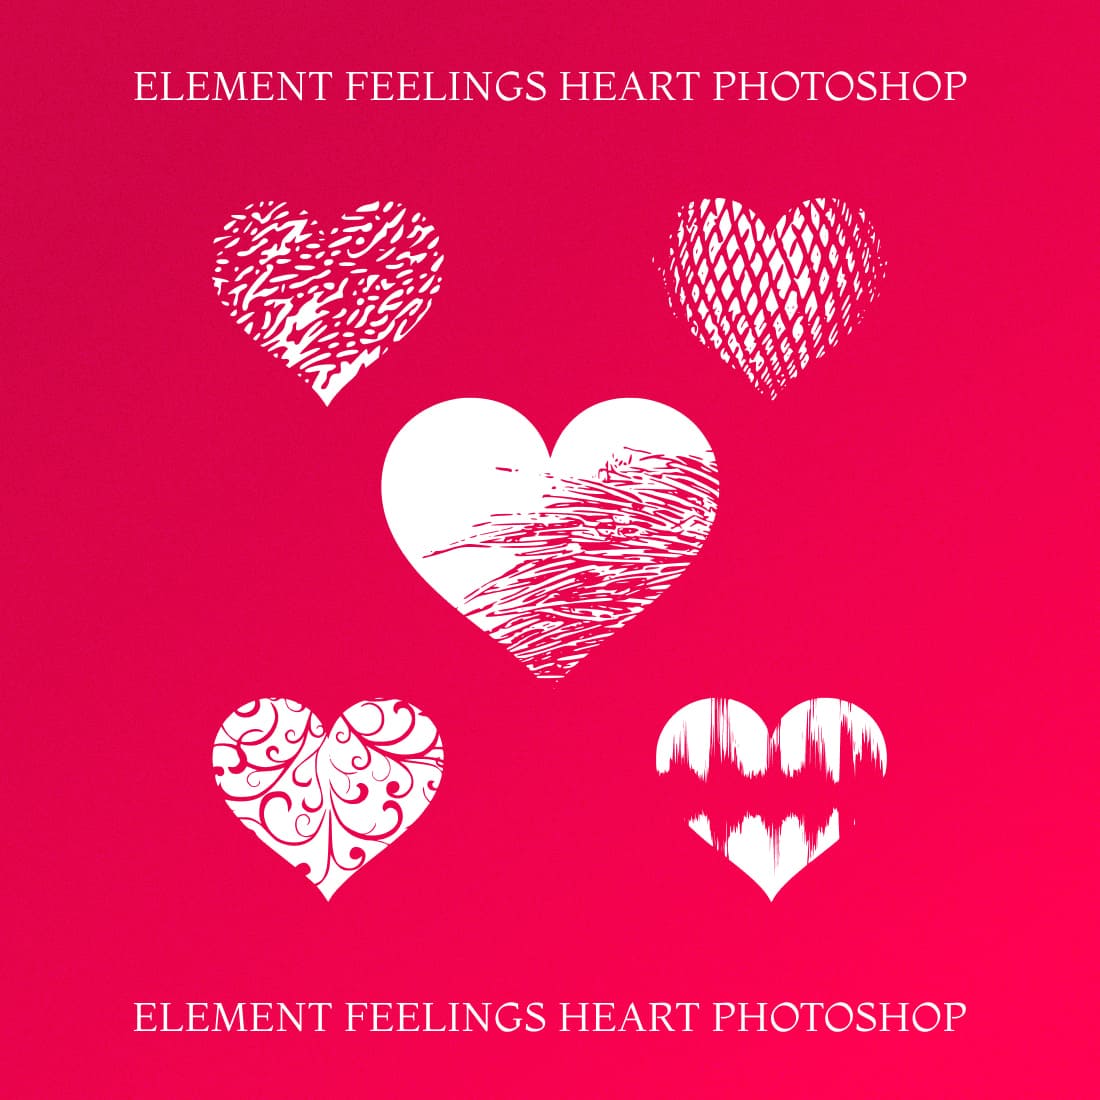 Element Feelings Heart Photoshop - Colorful Red Image Example.